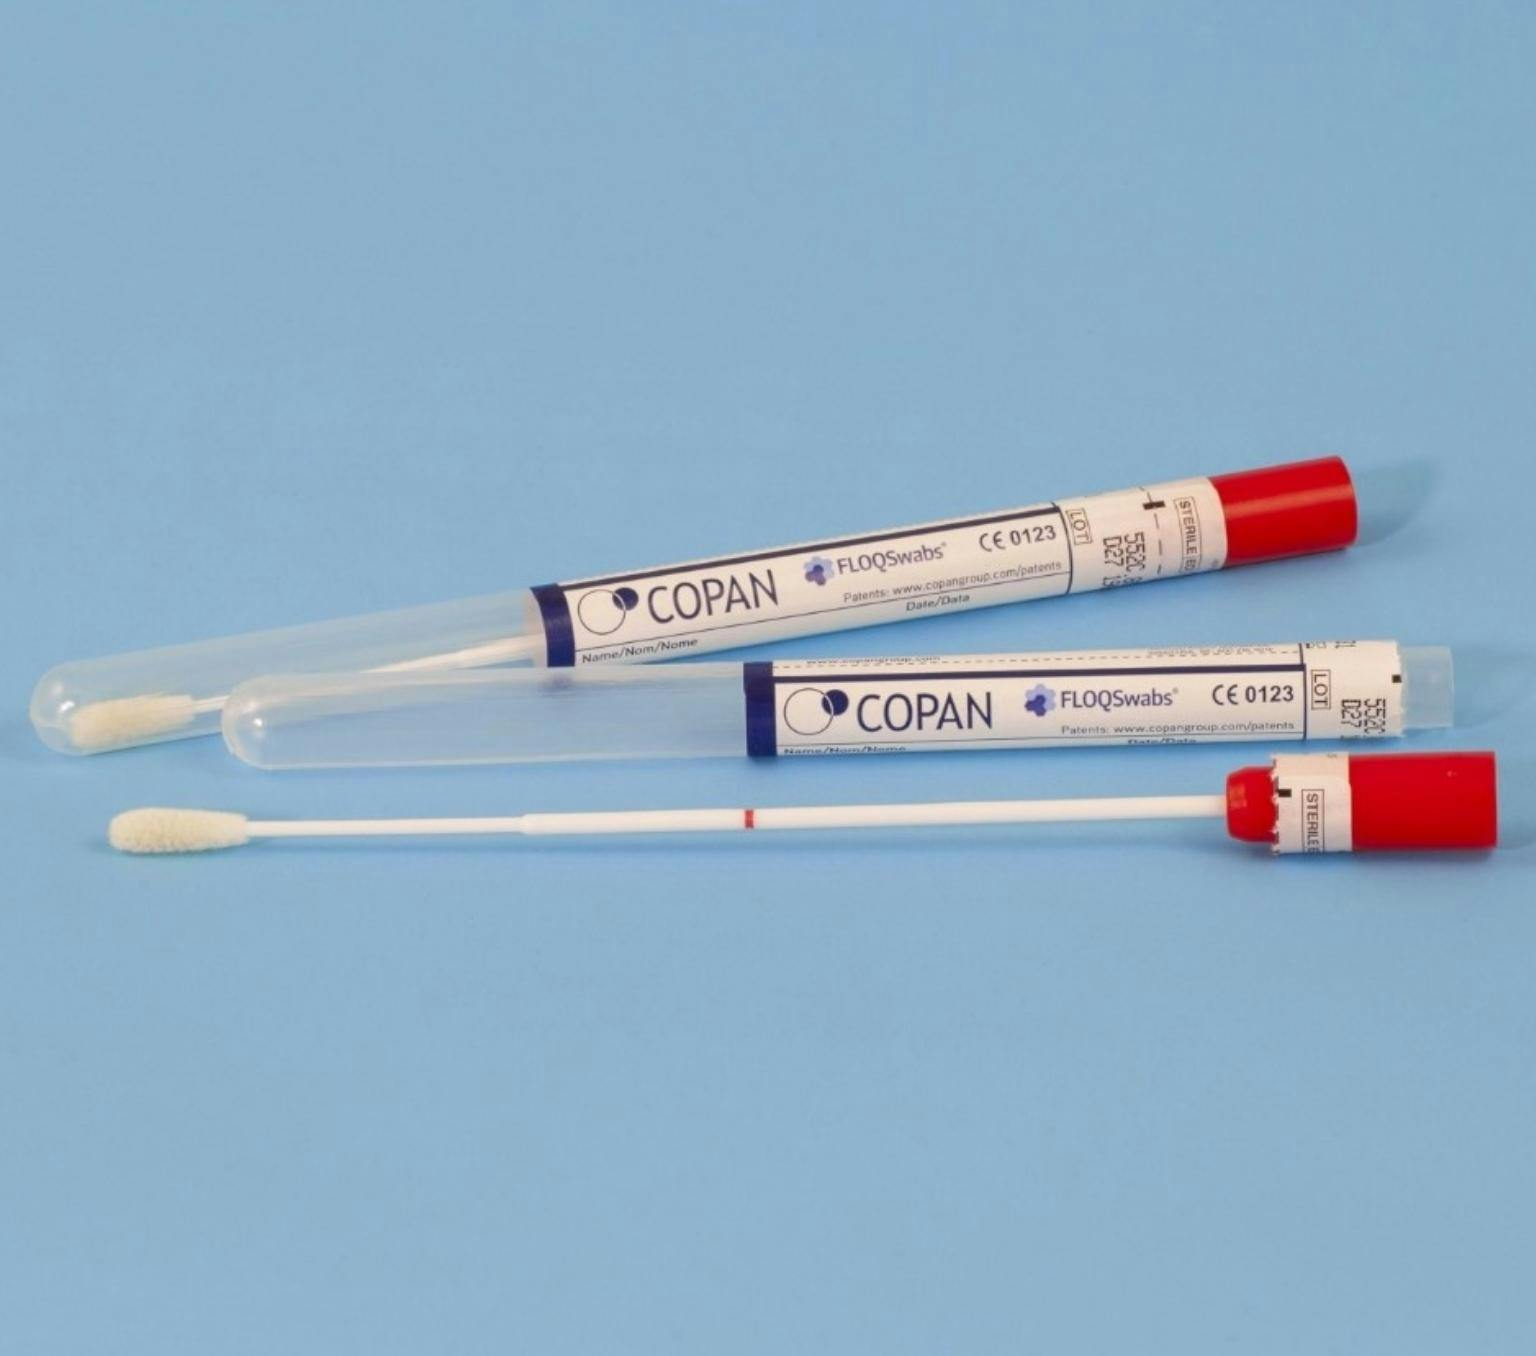 Blue background with to self-testing swab kits. The kits have a clear plastic tube with a label reading COPAN. The long white collection swab has a red lid.